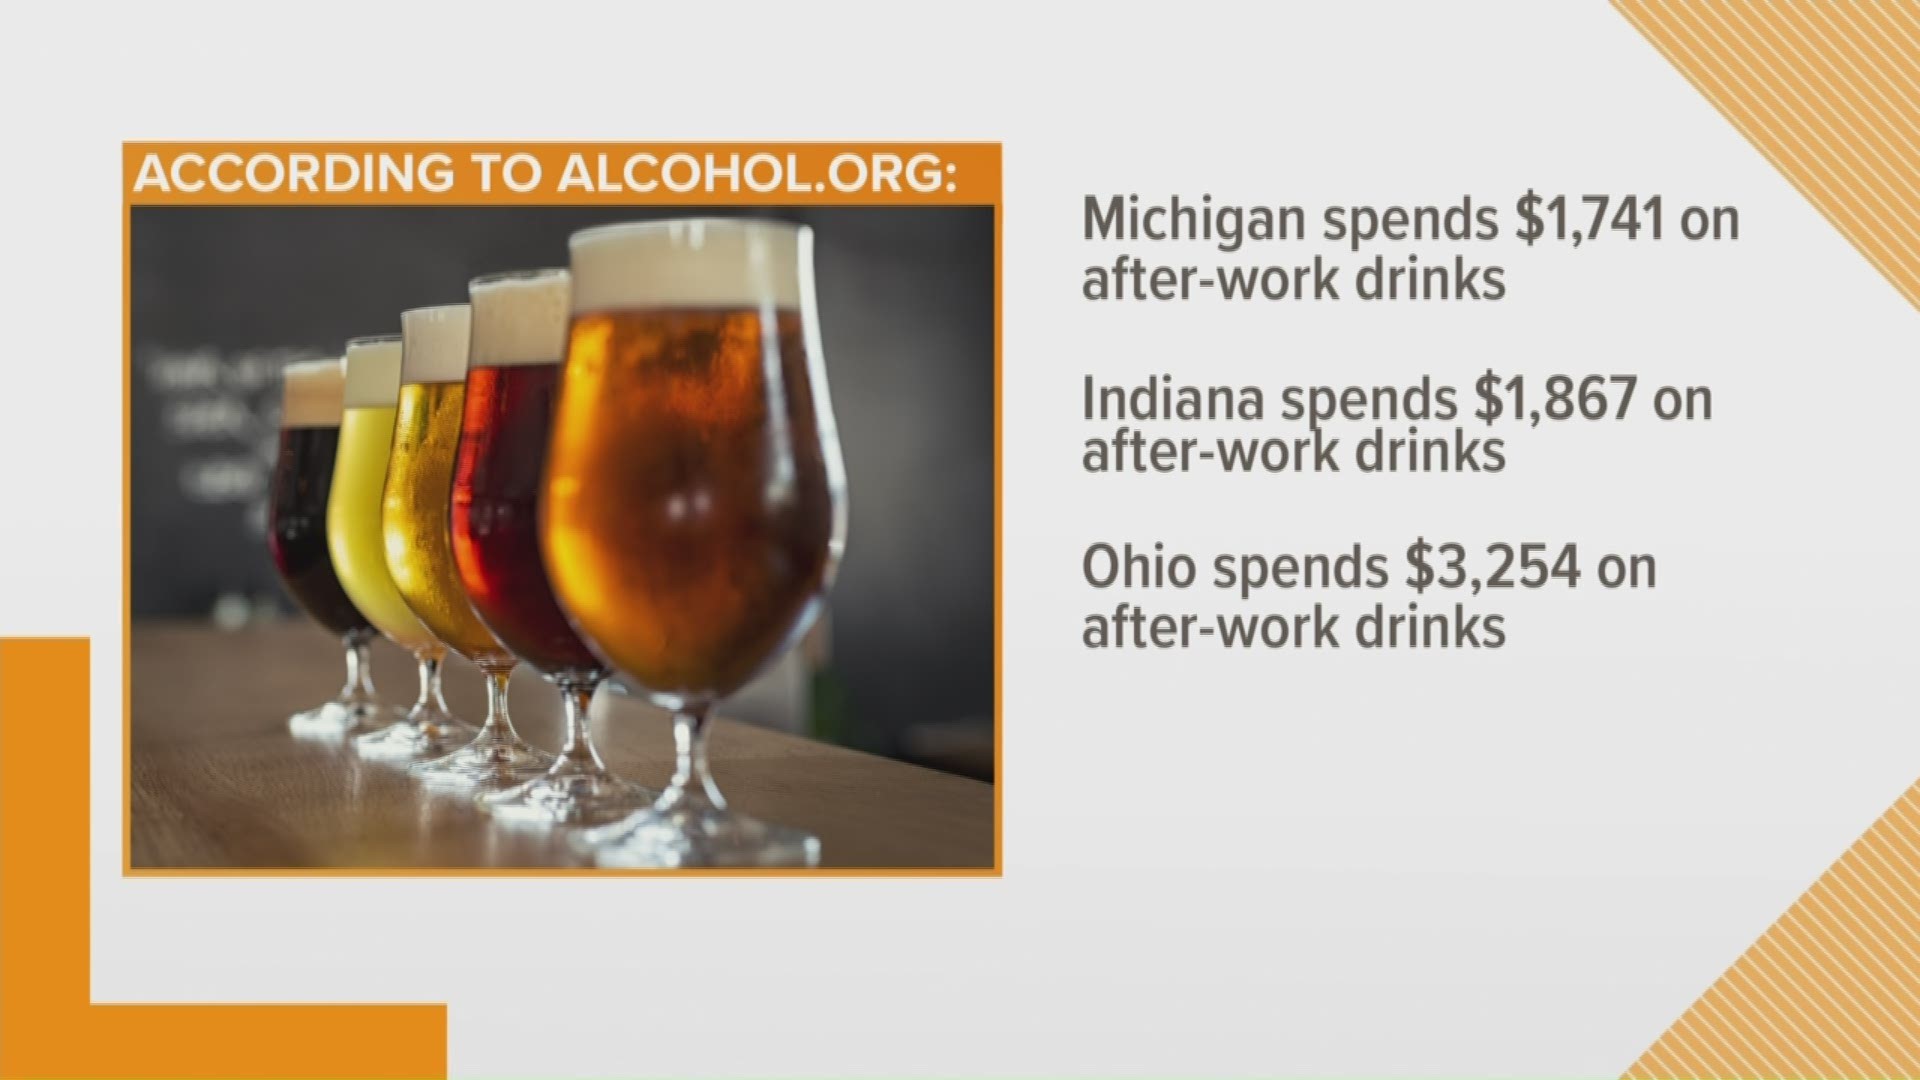 Michiganders spend $1,741 a year on drinks with colleagues, according to the survey by Alcohol.org